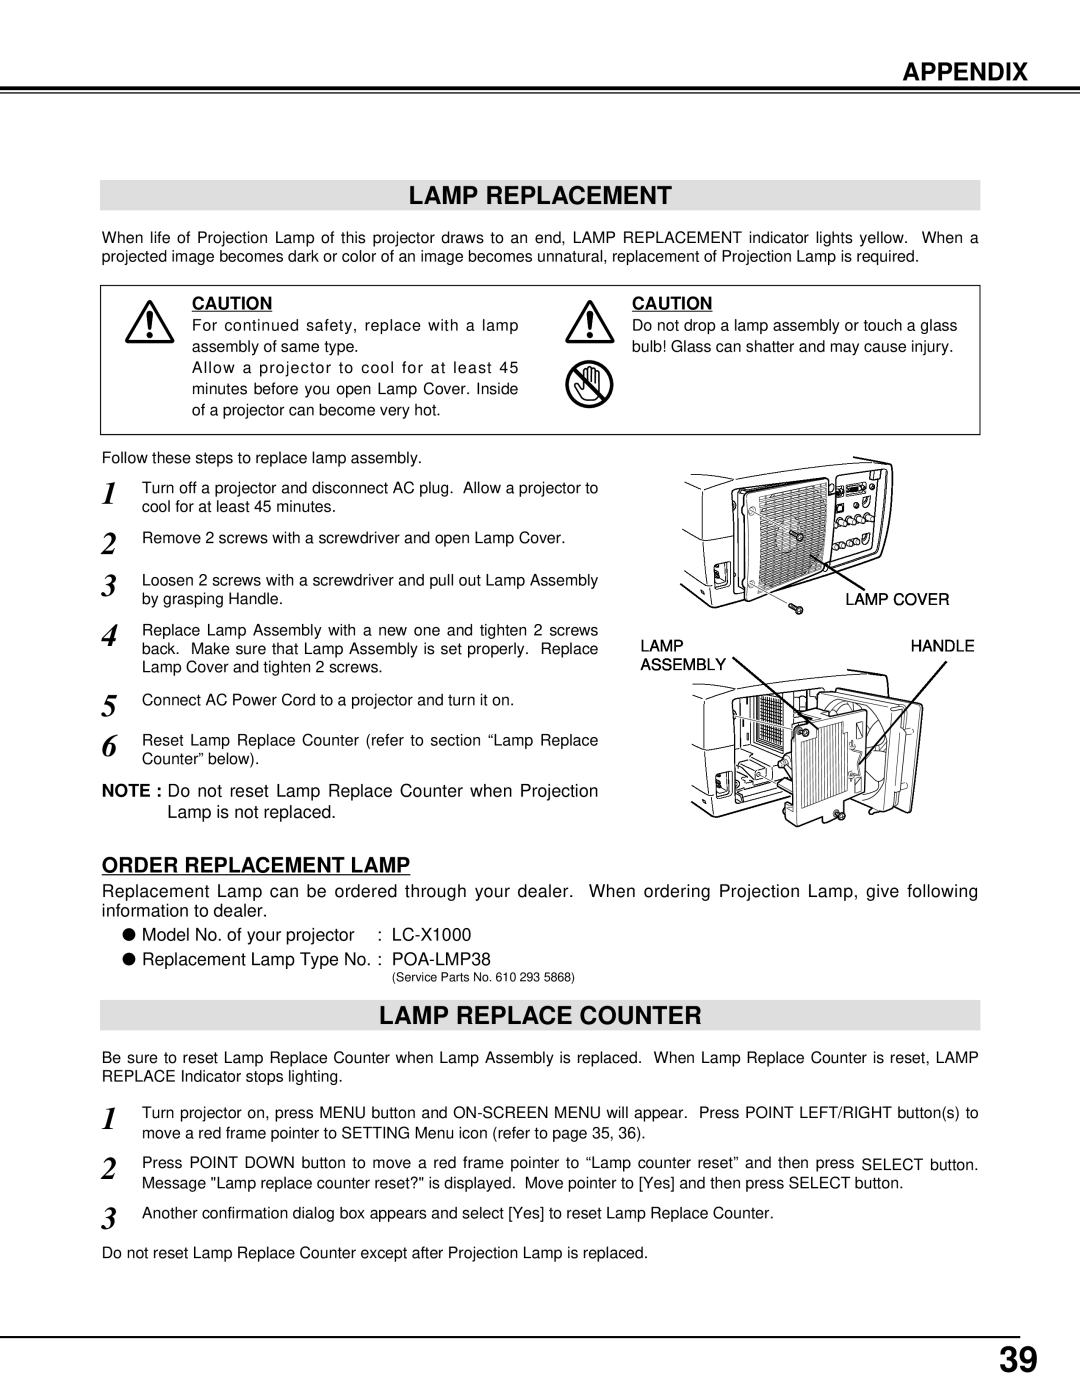 Eiki LC-X1000 instruction manual Appendix Lamp Replacement, Lamp Replace Counter, Order Replacement Lamp 